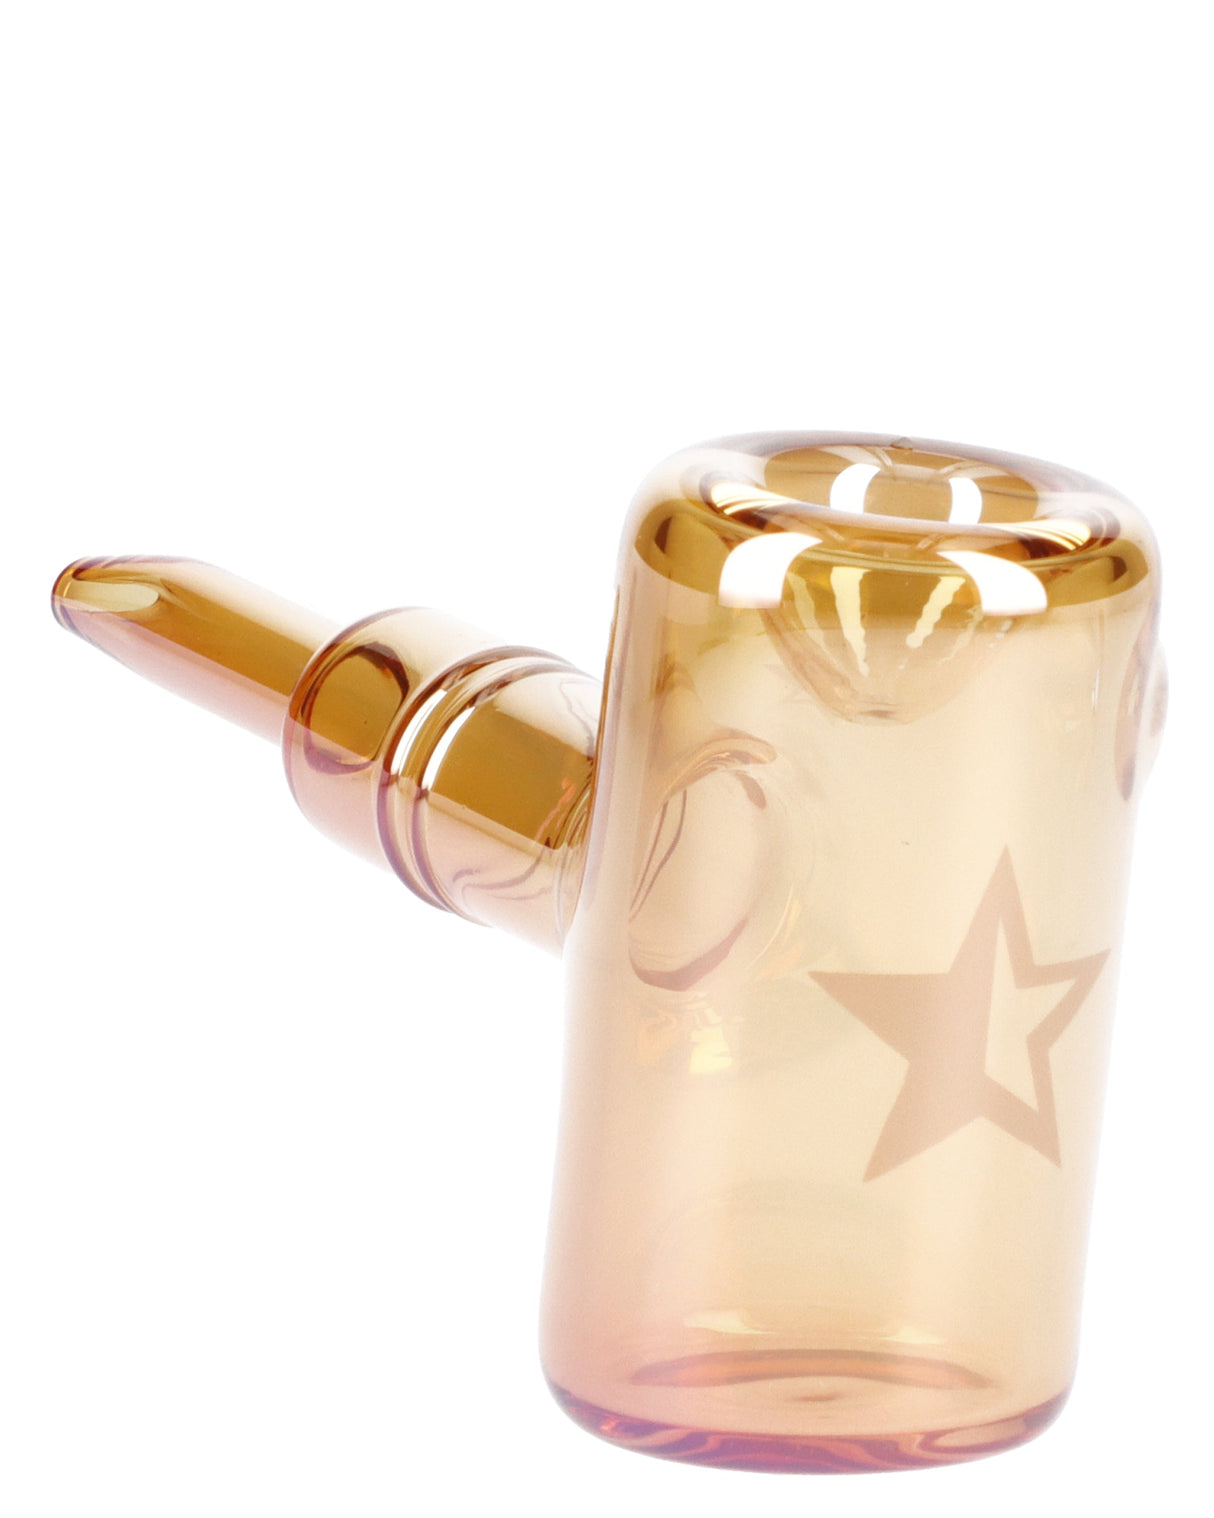 Fumed Orange Sherlock Pipe - 5in, handcrafted with star design, side view on white background